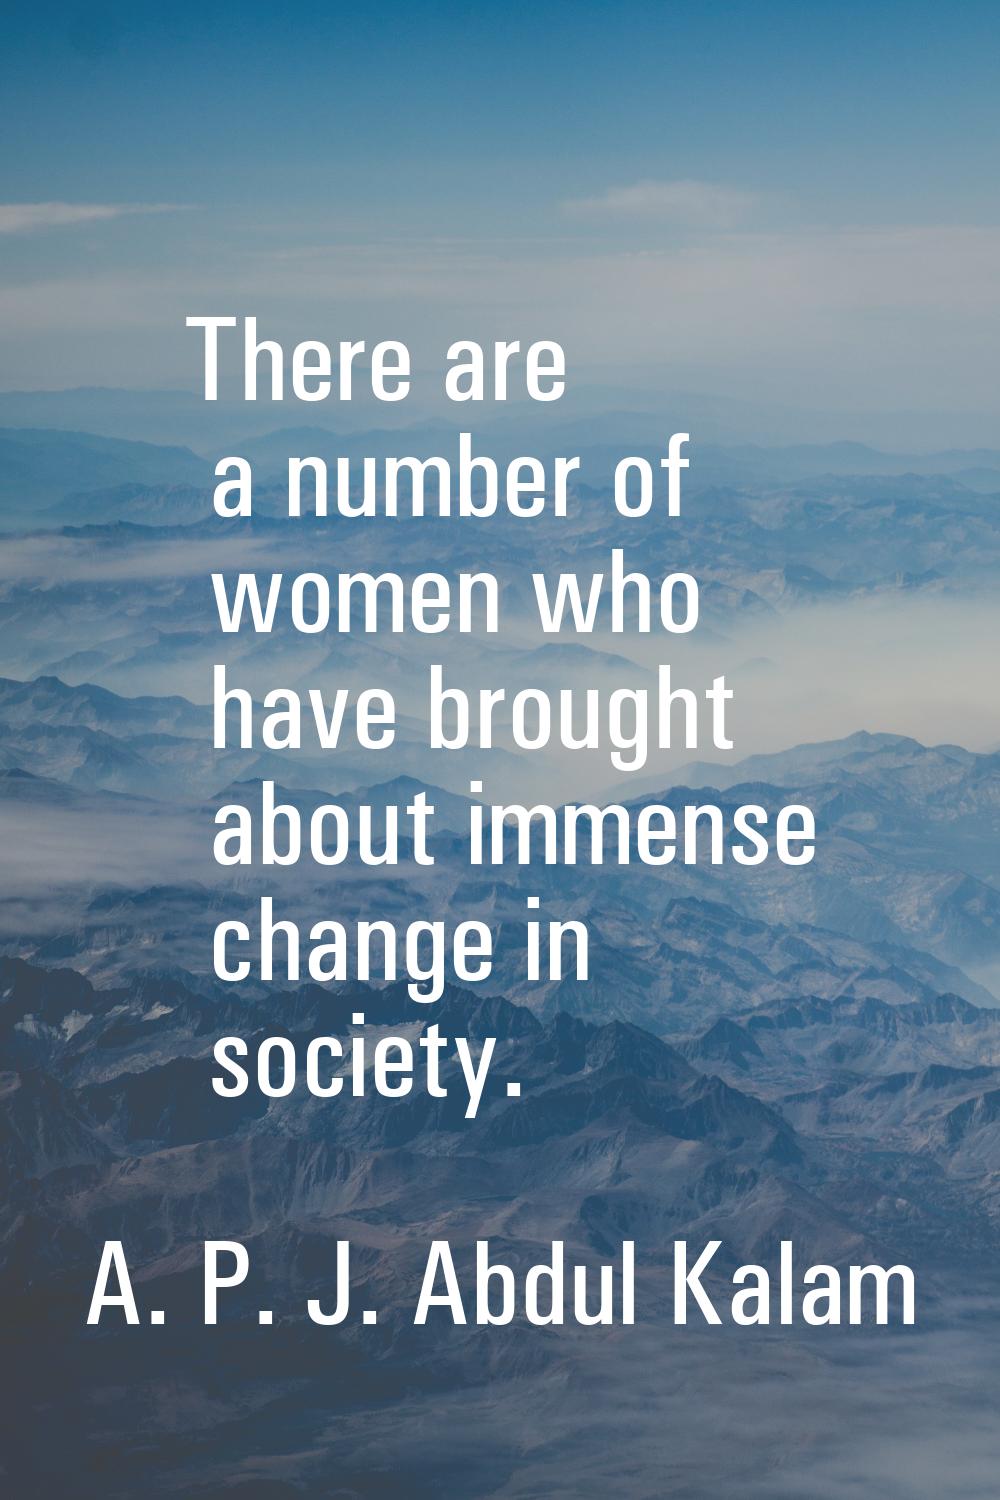 There are a number of women who have brought about immense change in society.